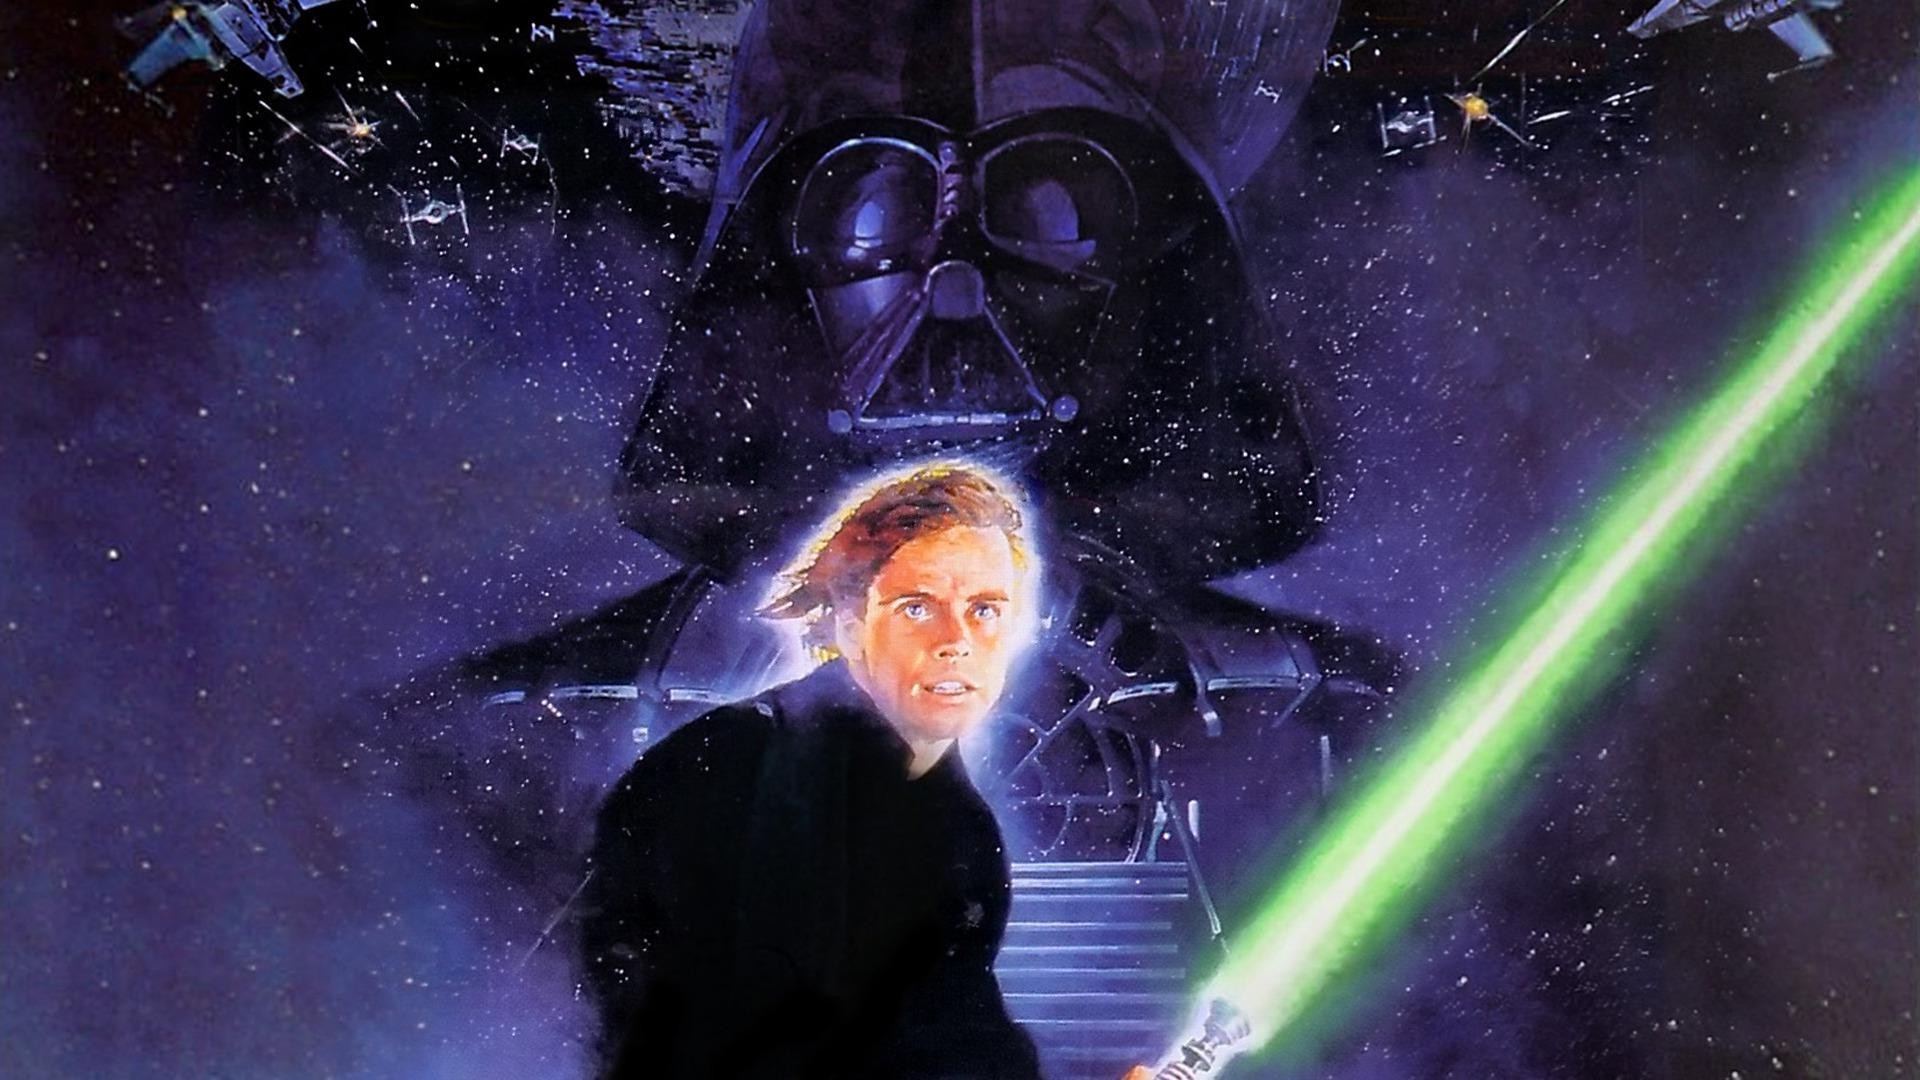 Wallpaper, Star Wars, movies, Darth Vader, universe, astronomy, Luke Skywalker, midnight, Star Wars Episode VI The Return of the Jedi, darkness, screenshot, 1920x1080 px, computer wallpaper, special effects, outer space, astronomical